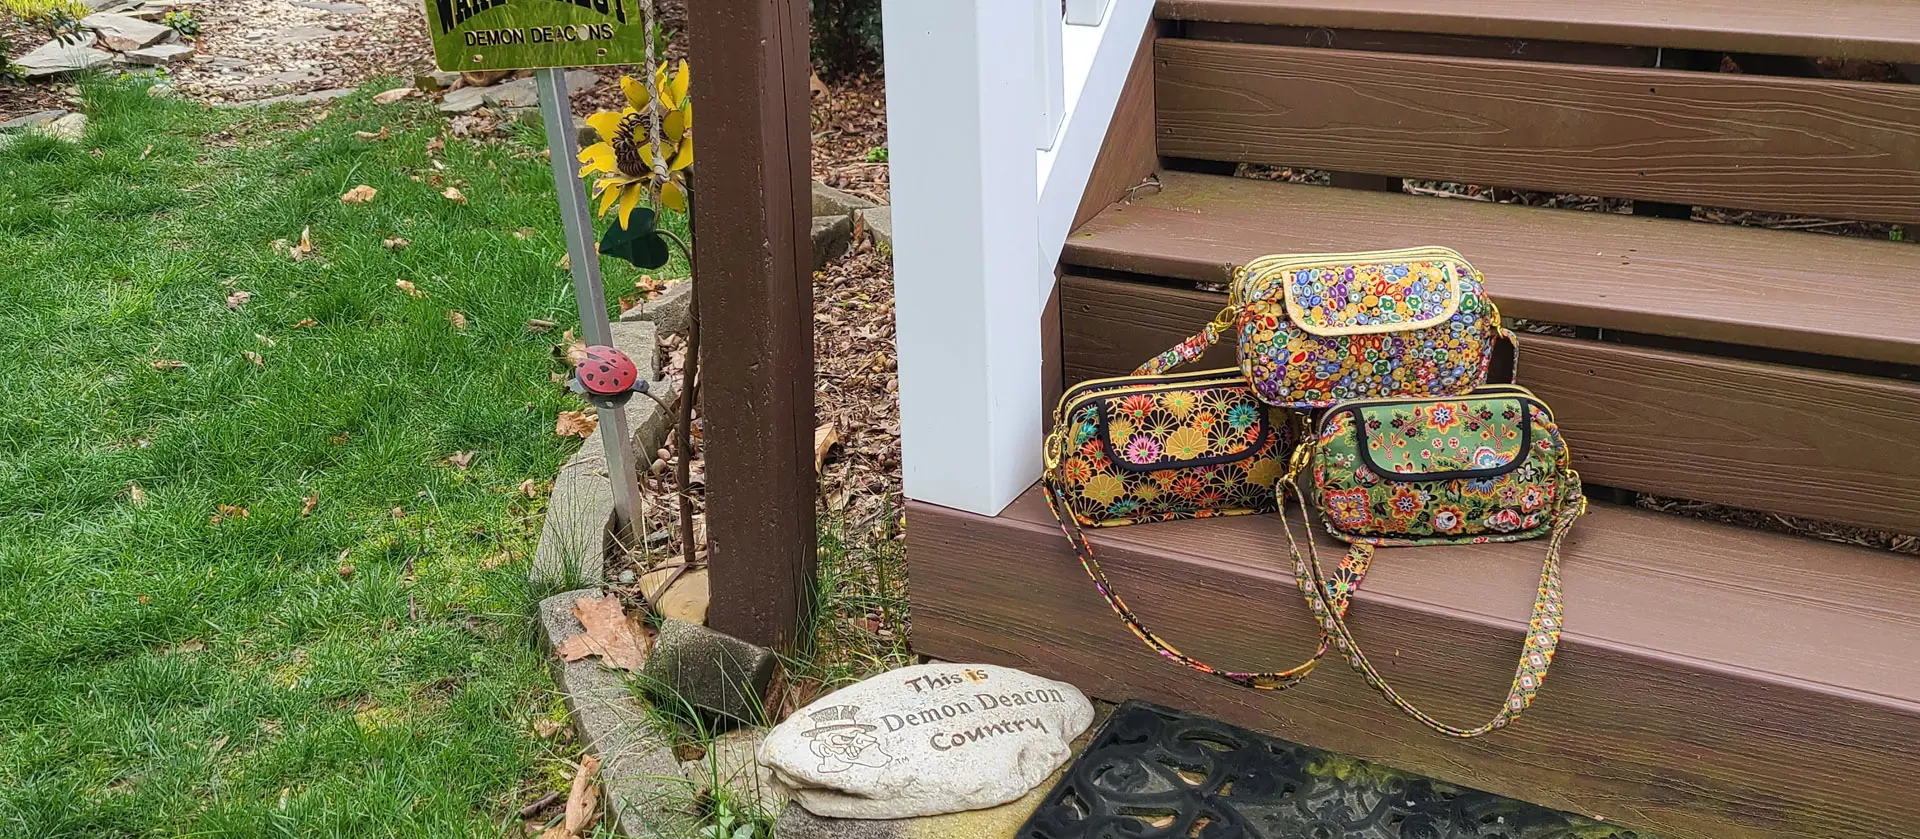 Two backpacks sitting on the steps of a house.